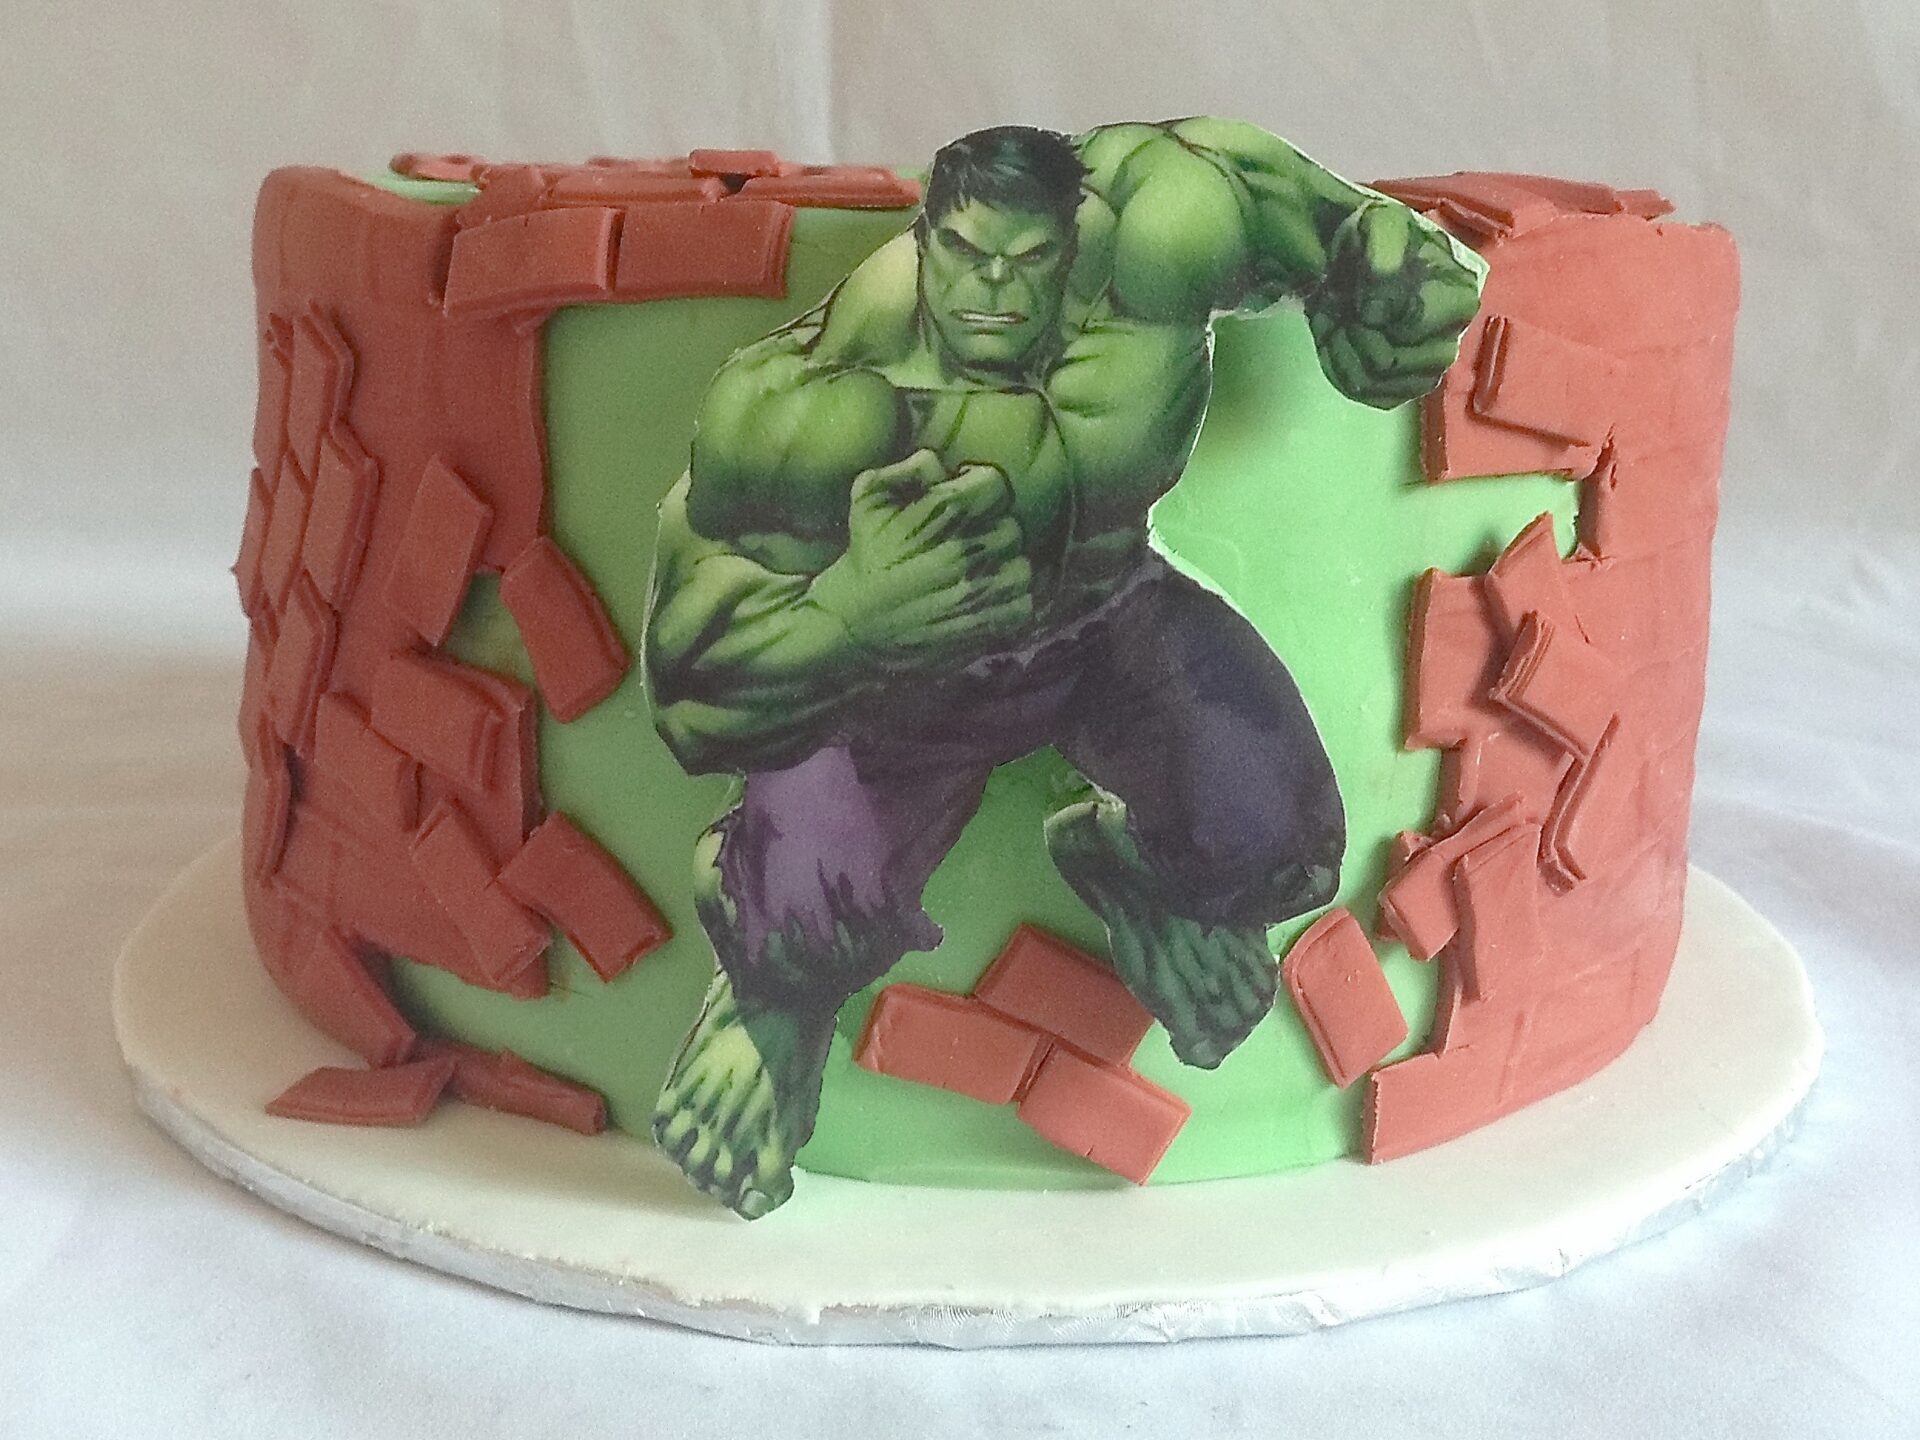 Send Hulk Fondant Cake Online in India at Indiagift.in